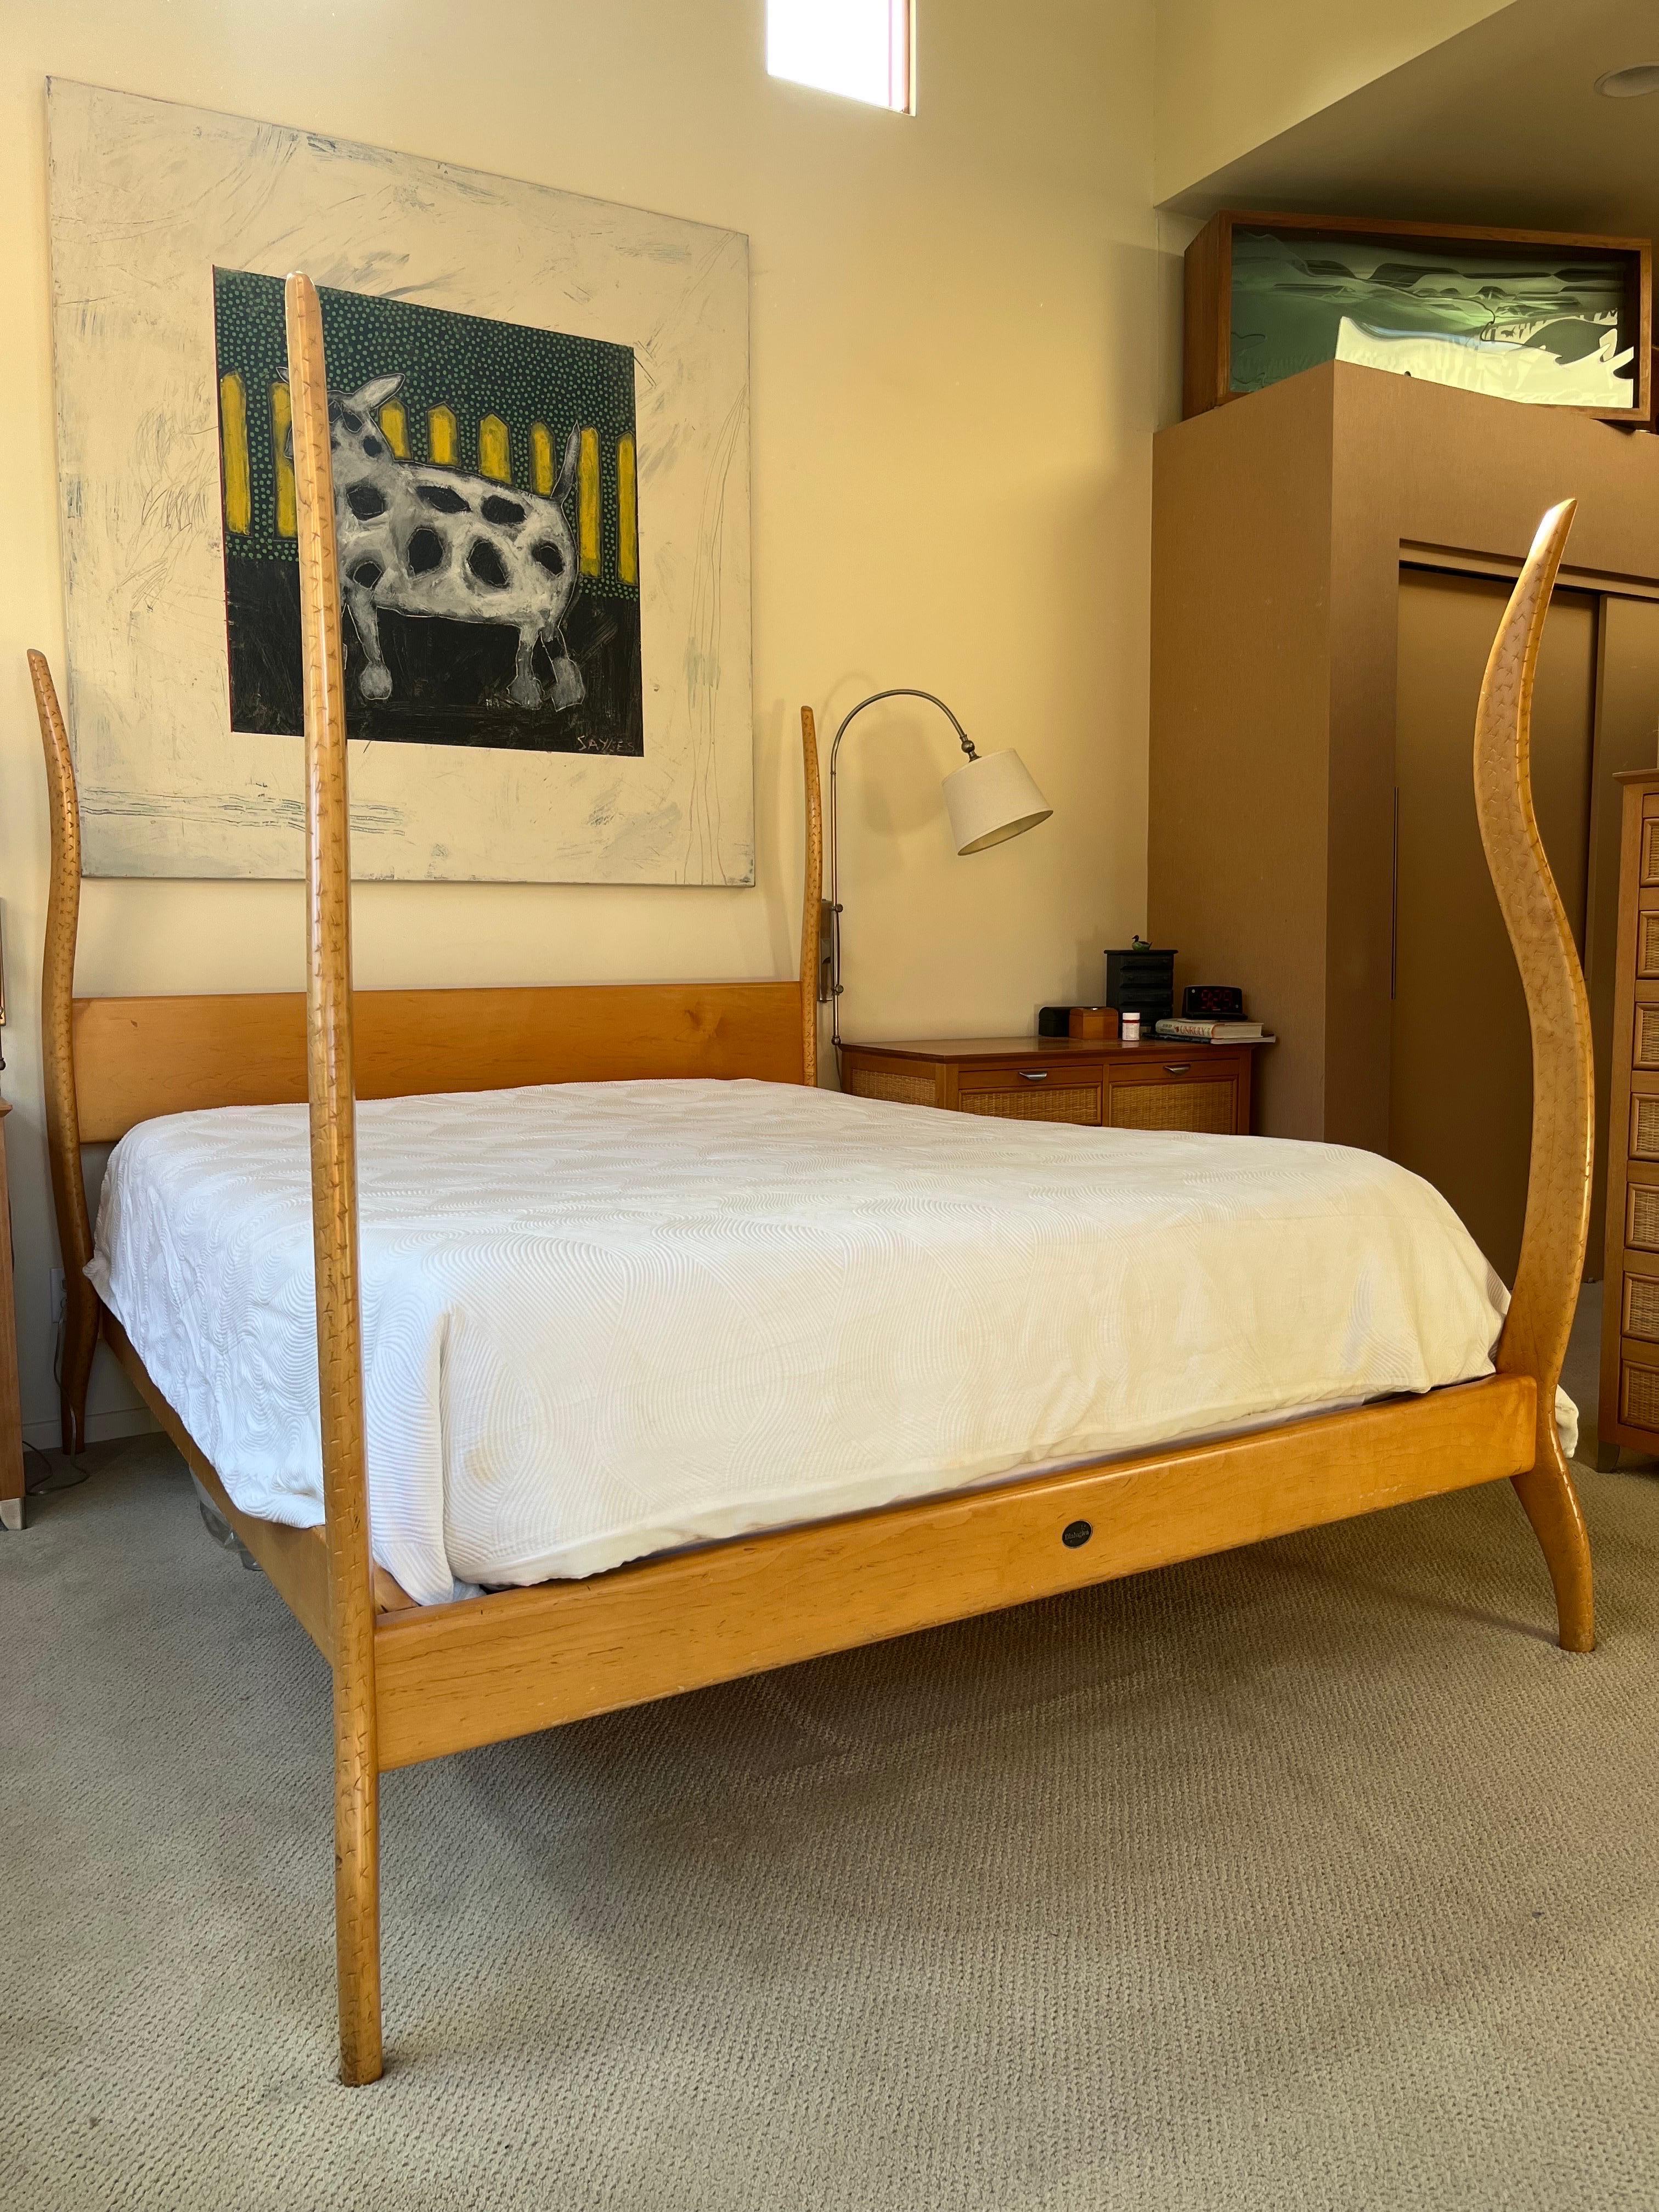 1991 Rare Solid Maple Postmodern Queen Bed by Sergio Savarese for Dialogica 1